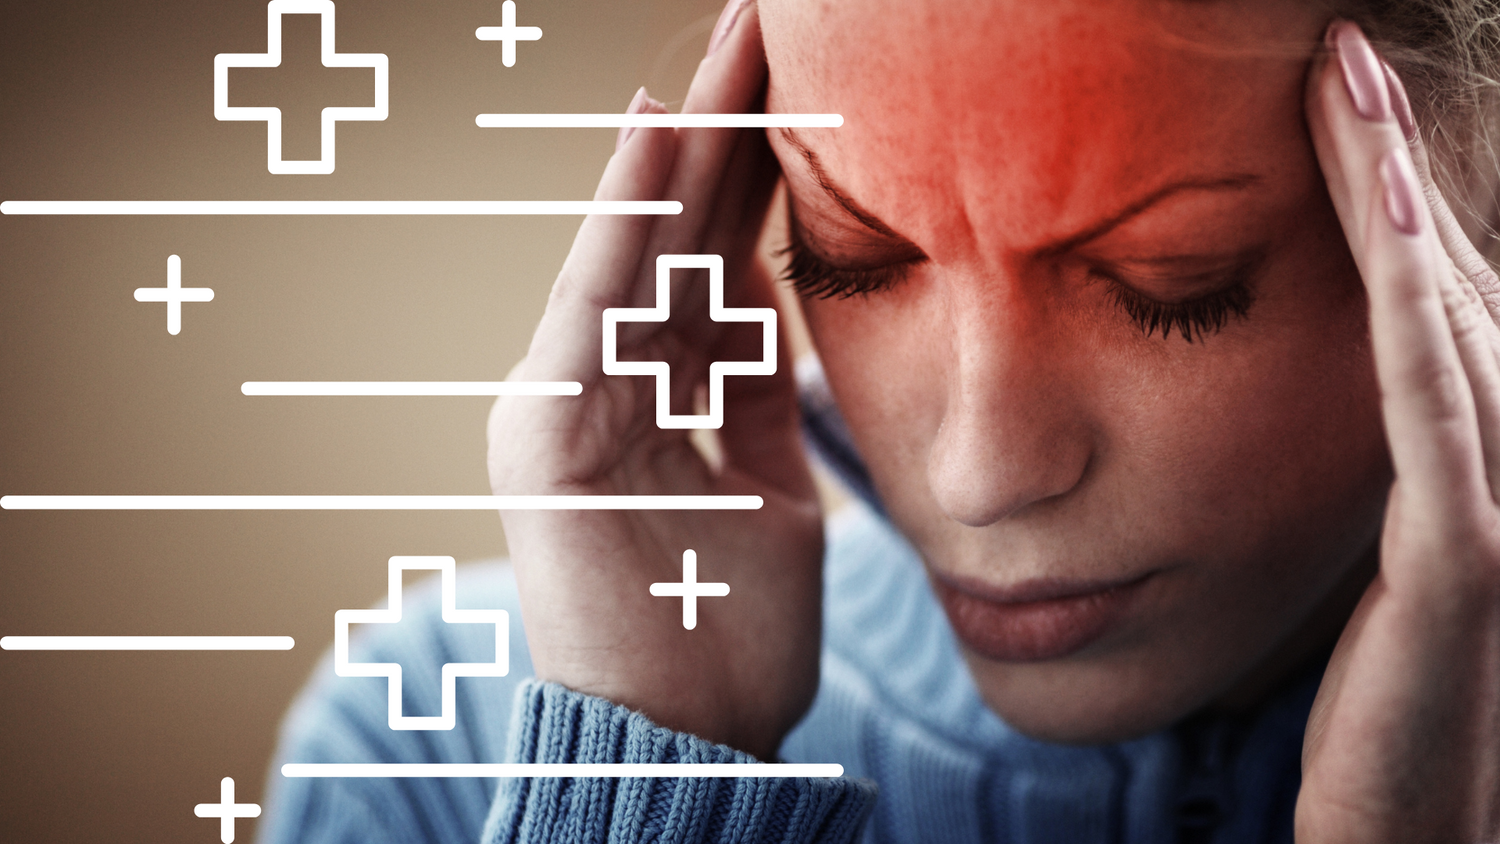 Natural Remedies for Headaches and Stuffy Noses: Top 10 Foods and Treatments